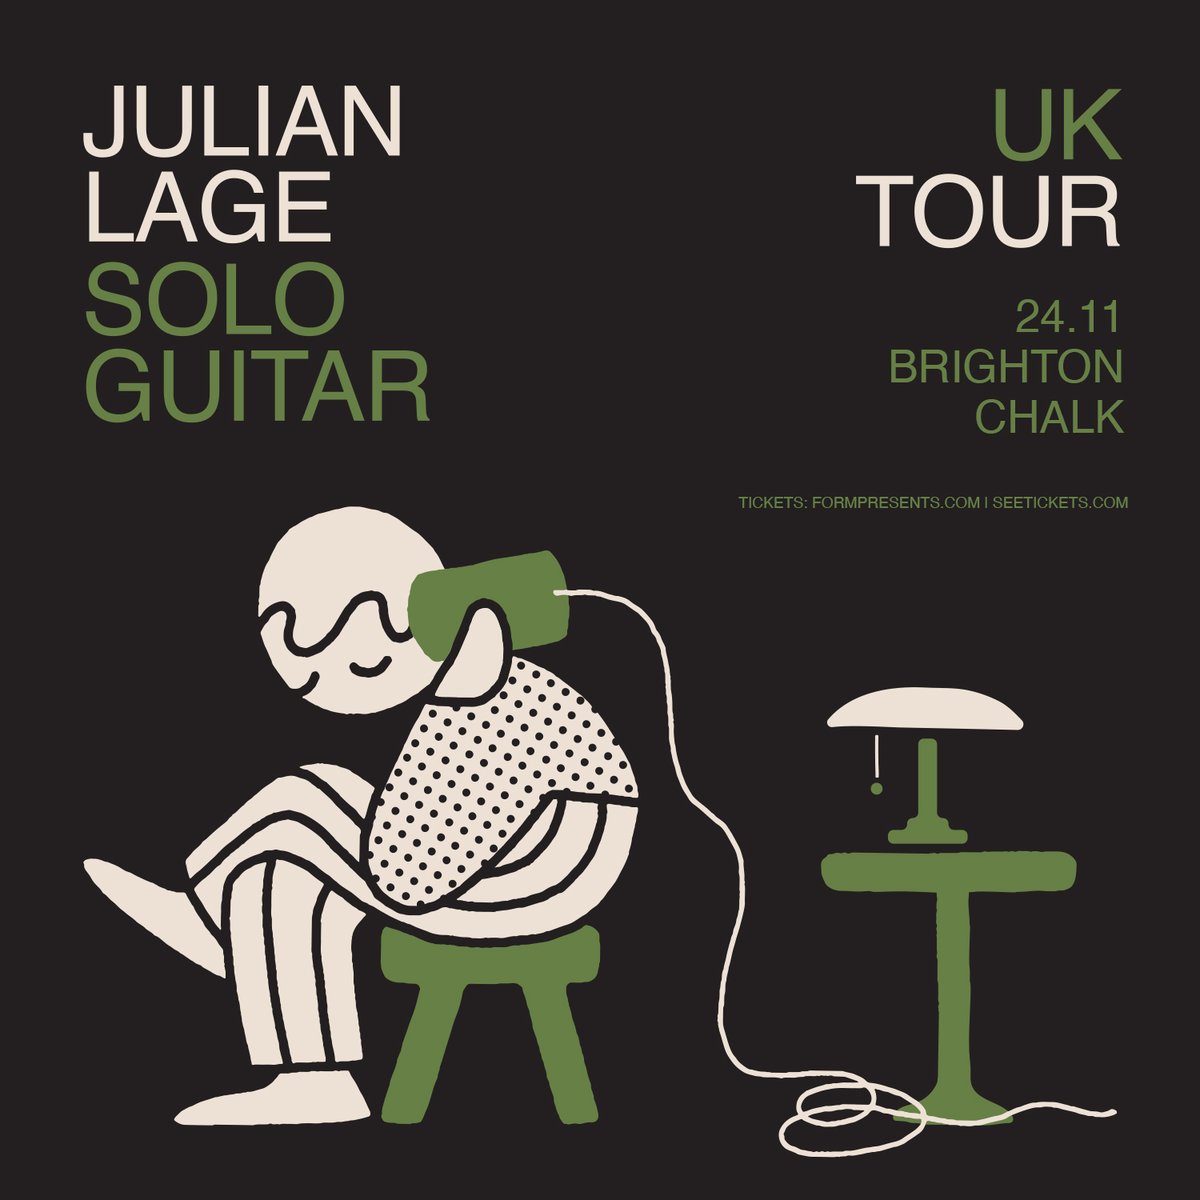 Hailed as one of the most prodigious guitarists of his generation and “highest category of improvising musicians' (New Yorker), @julian_lage is coming to @chalkvenue, Brighton on 24th November! 🎟 Tickets go on sale 10am Friday.